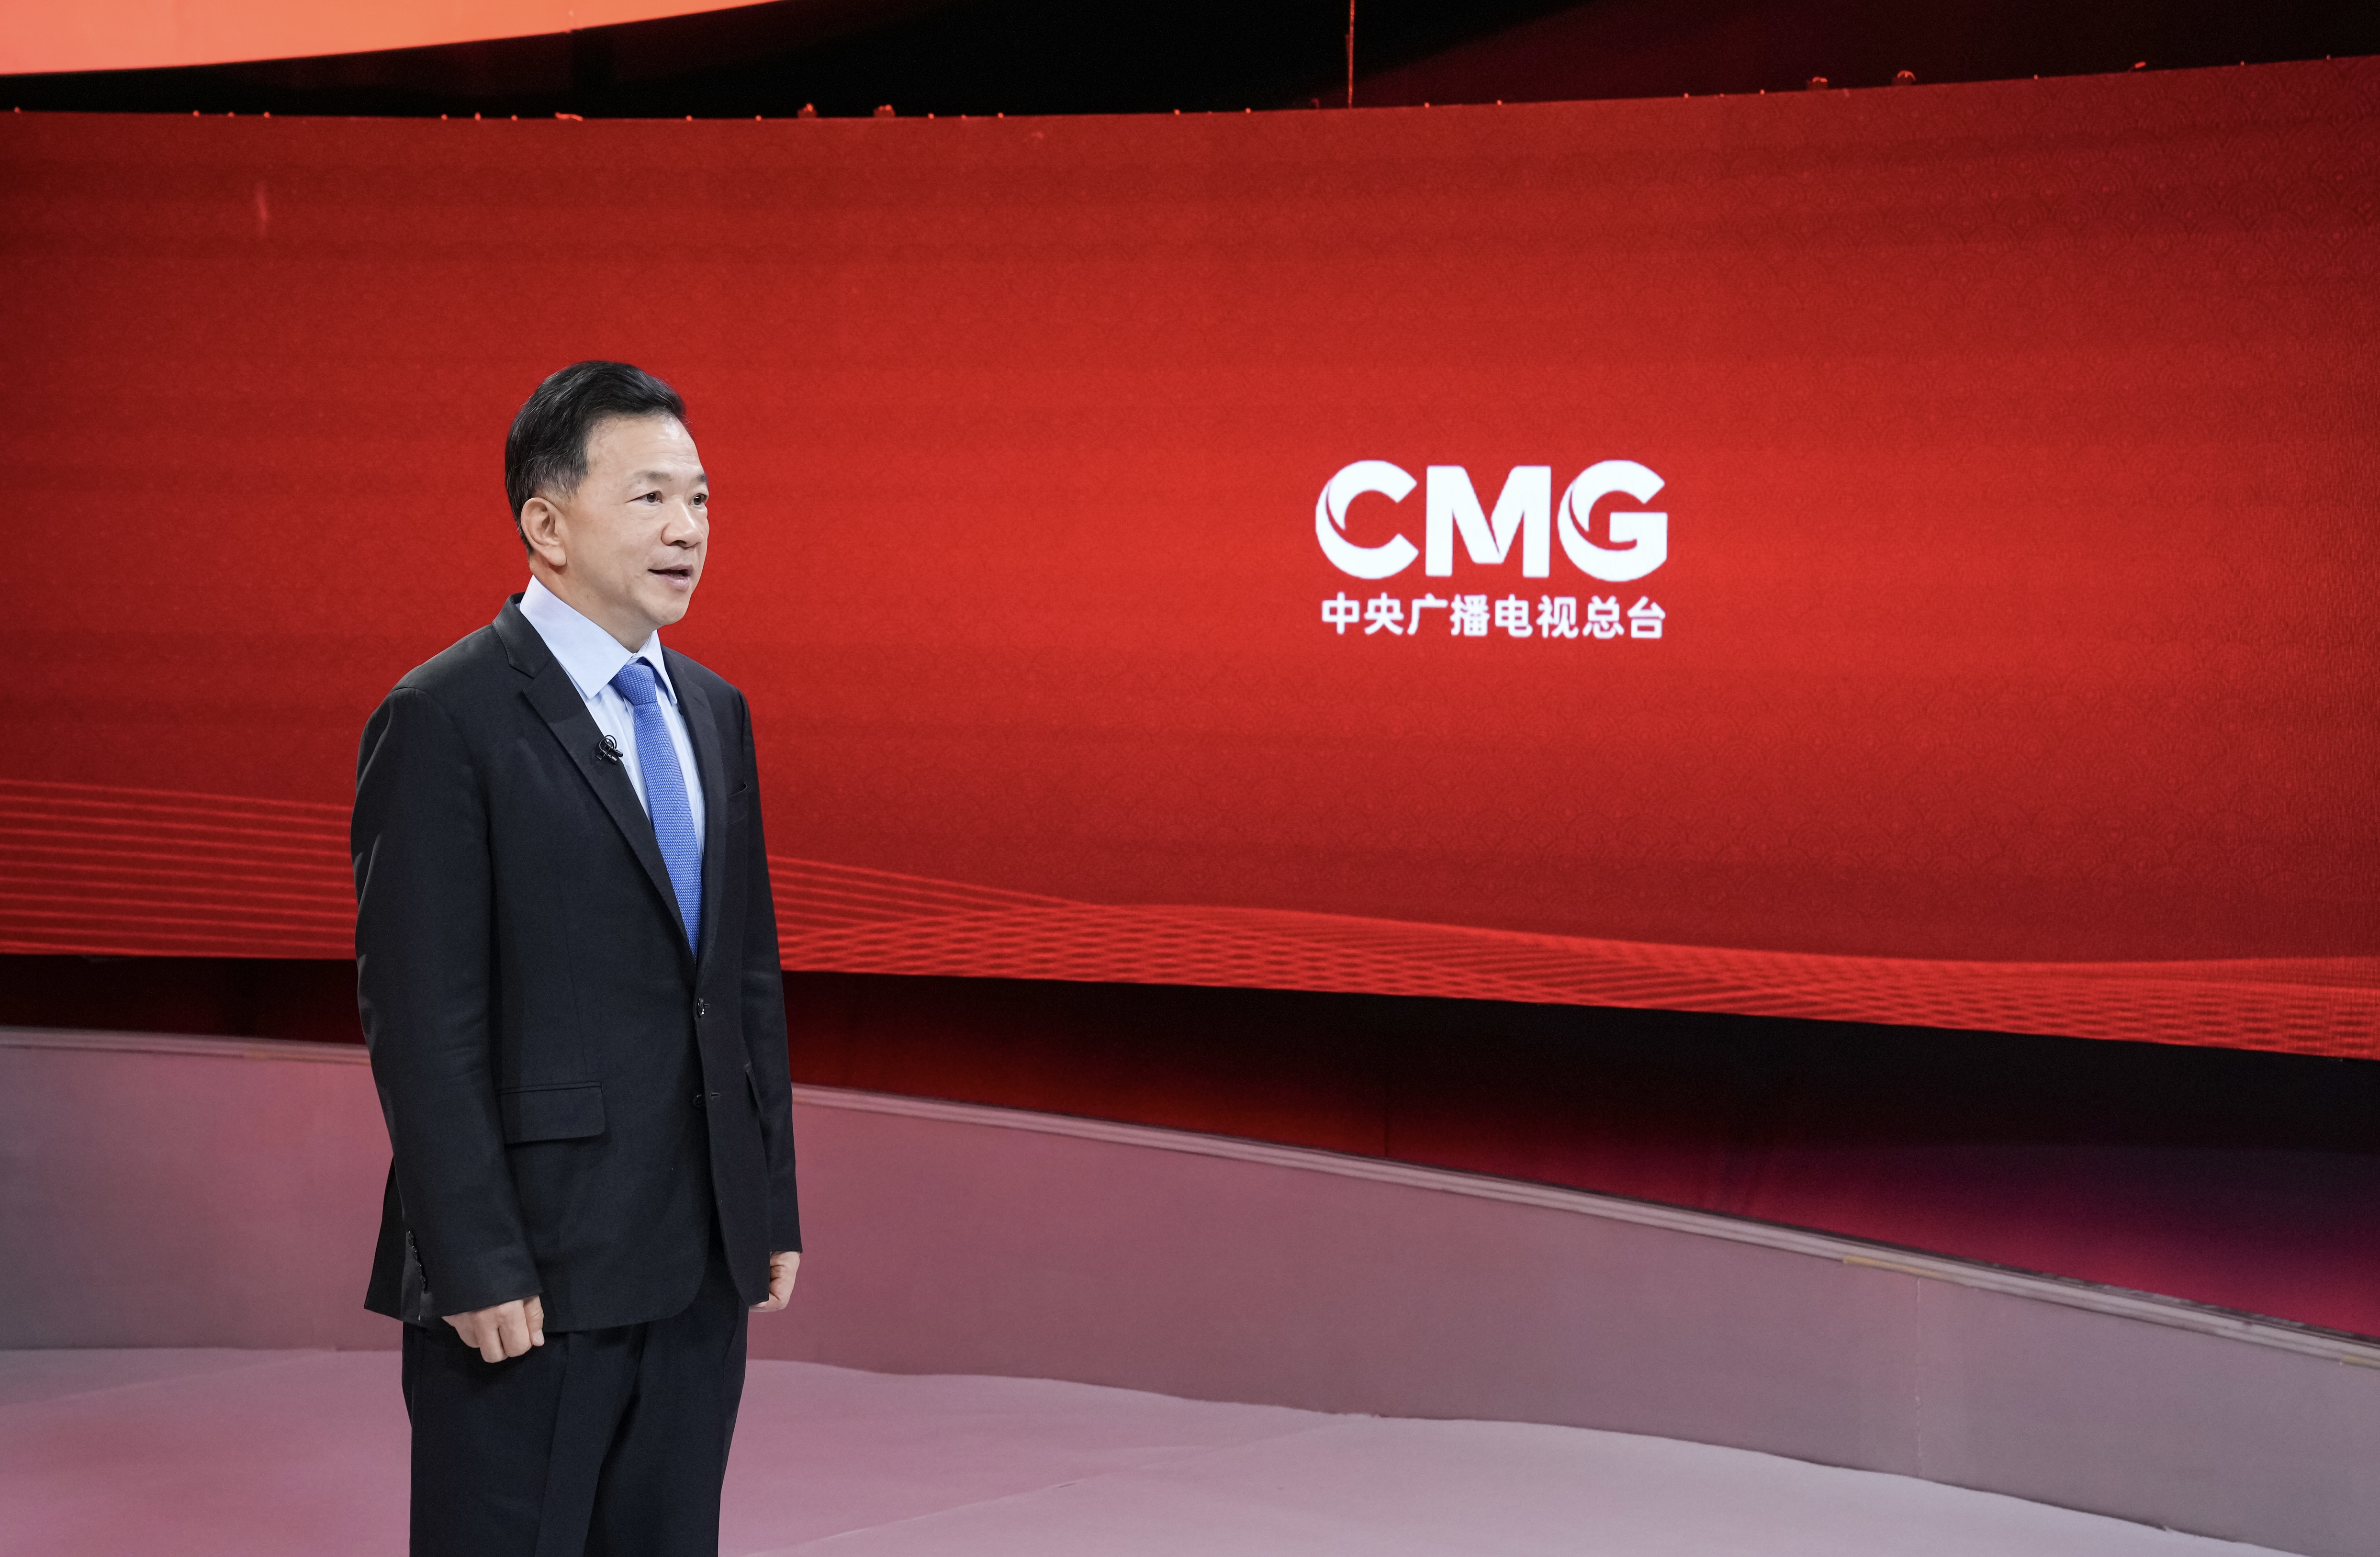 CMG president extends New Year greetings to overseas audiences